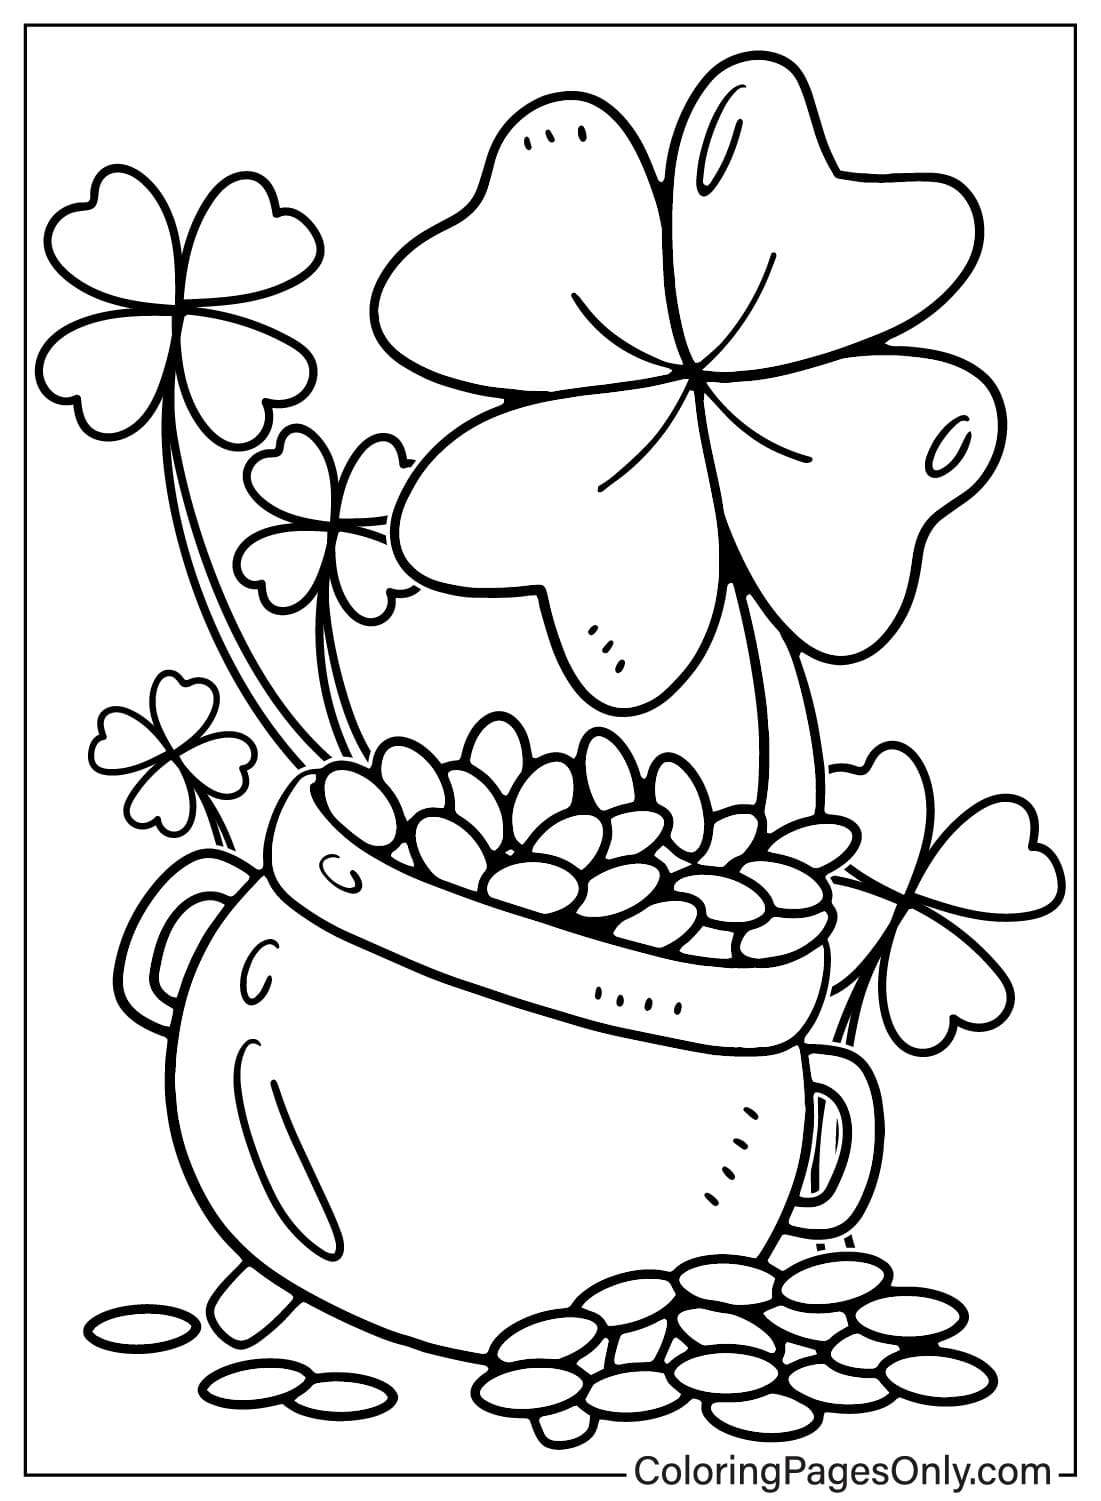 Free Lucky Charms Coloring Page Free Printable Coloring Pages